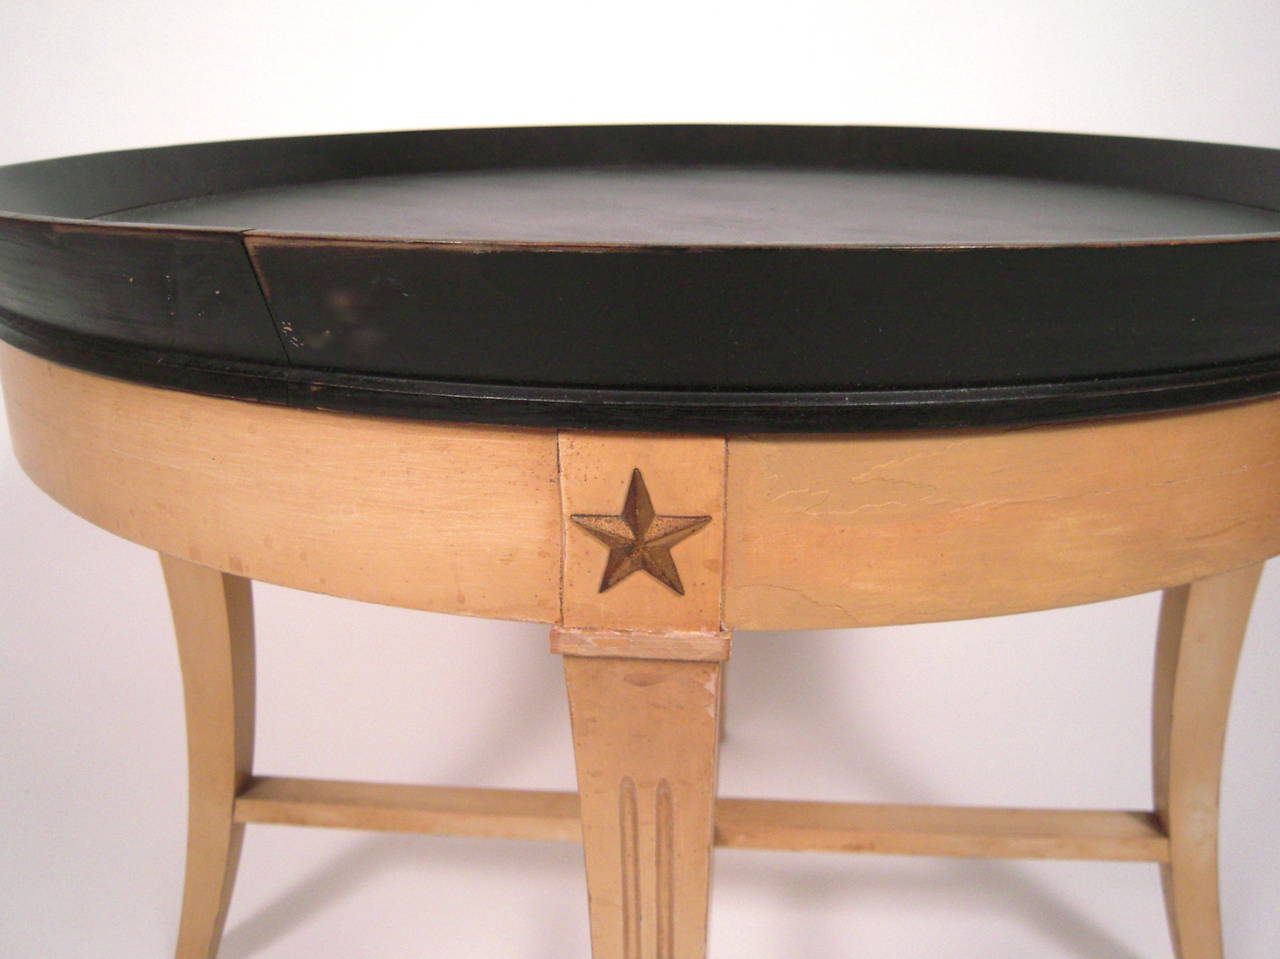 A Kittinger round tray top coffee table, with removable black painted top on a conforming cream colored base, the fluted splayed legs headed by applied brass stars and joined by cross stretchers. Retaining original maker's label on underside.